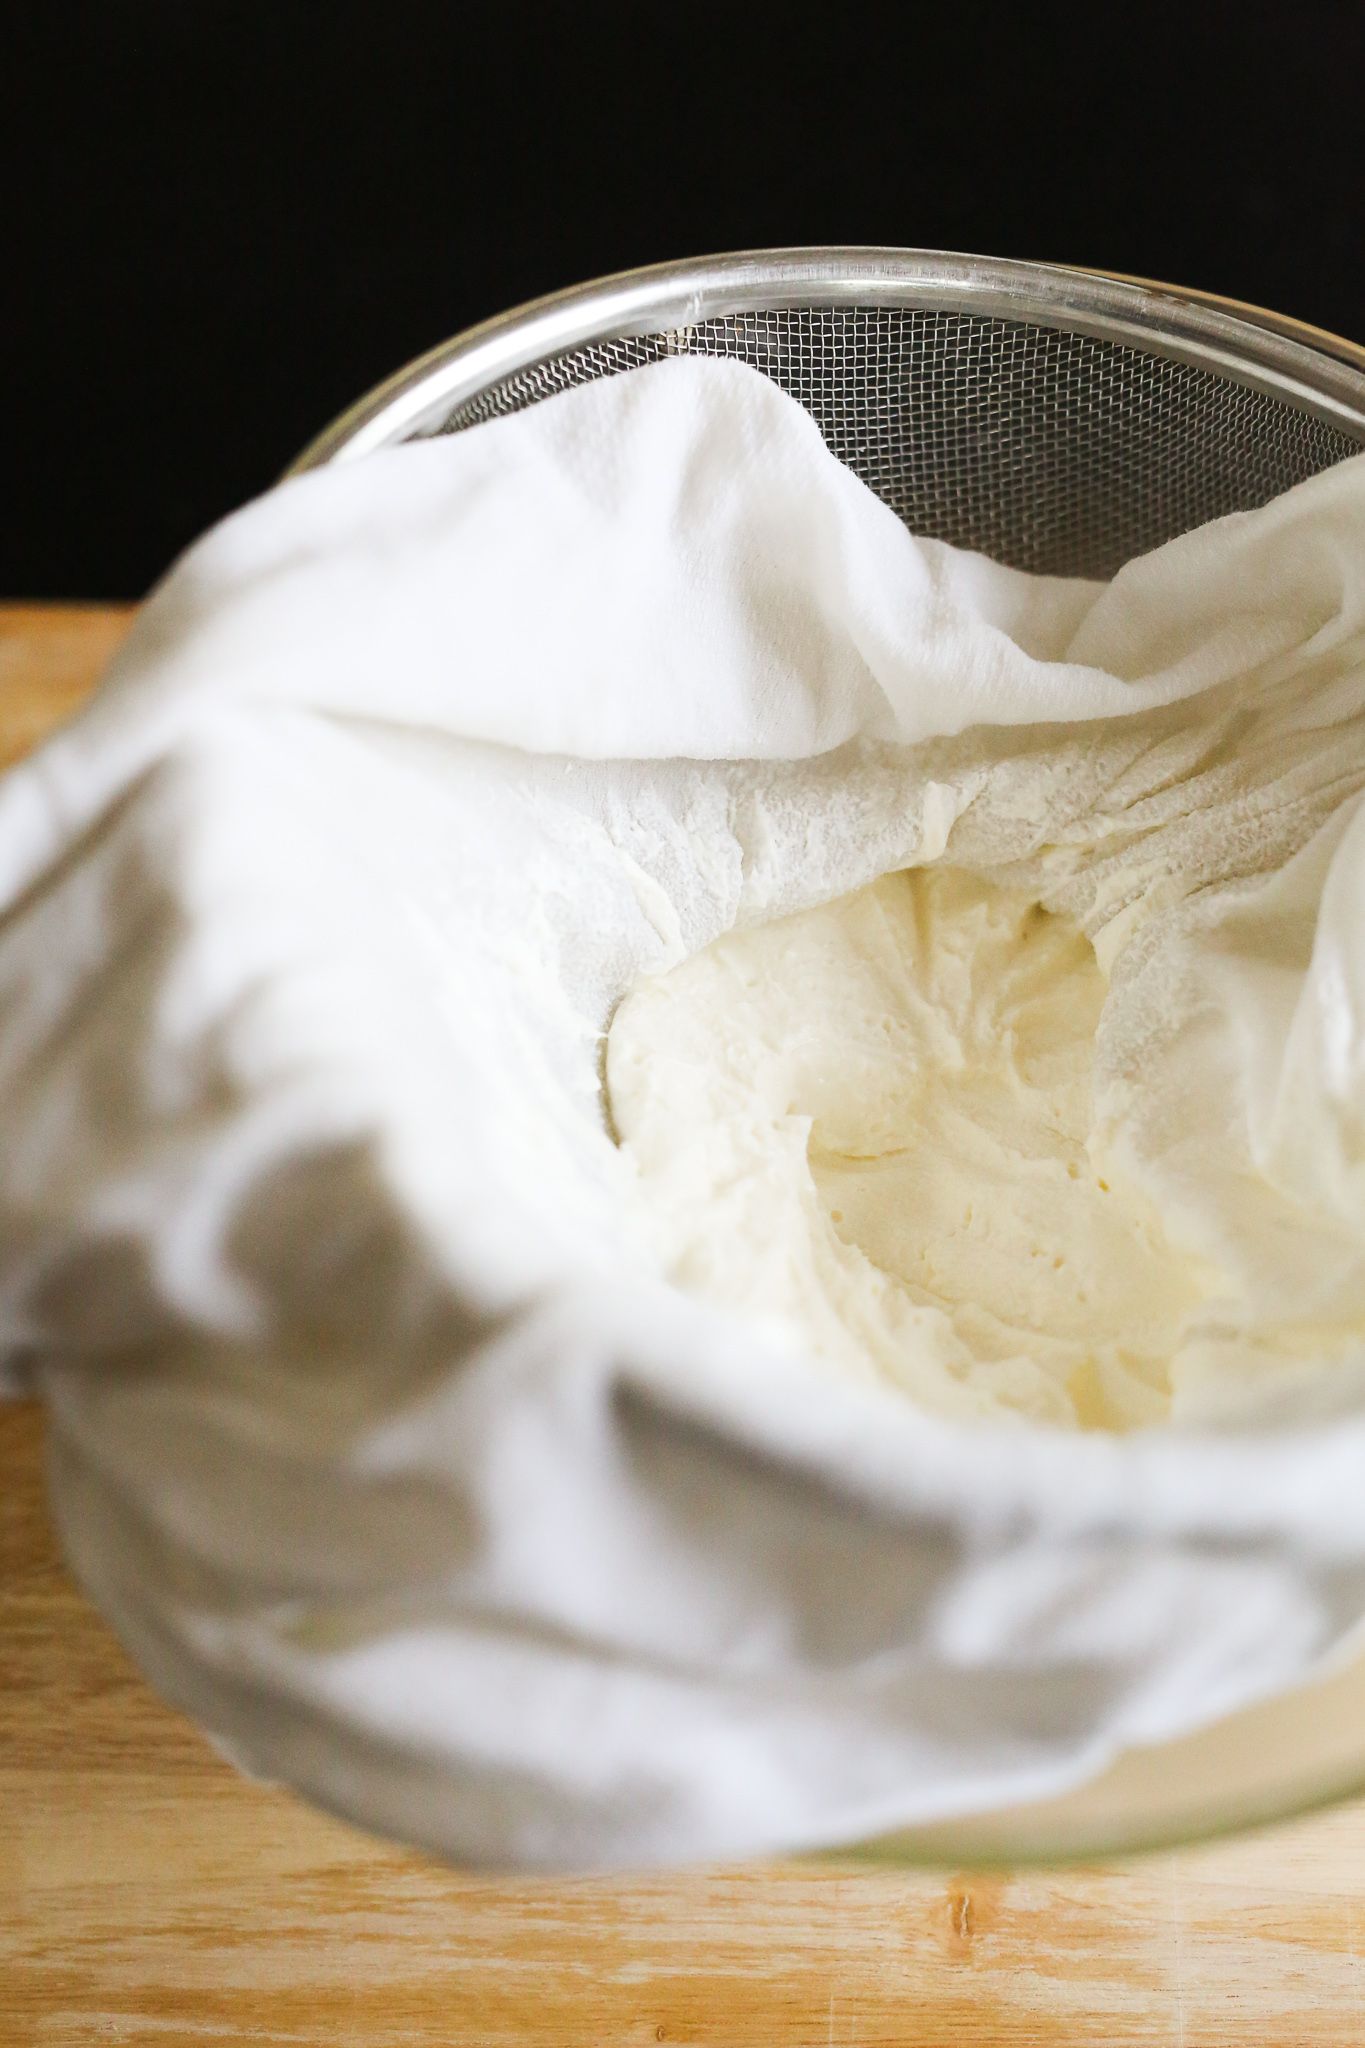 labneh in a white cloth-lined silver strainer sitting on cutting board on black table